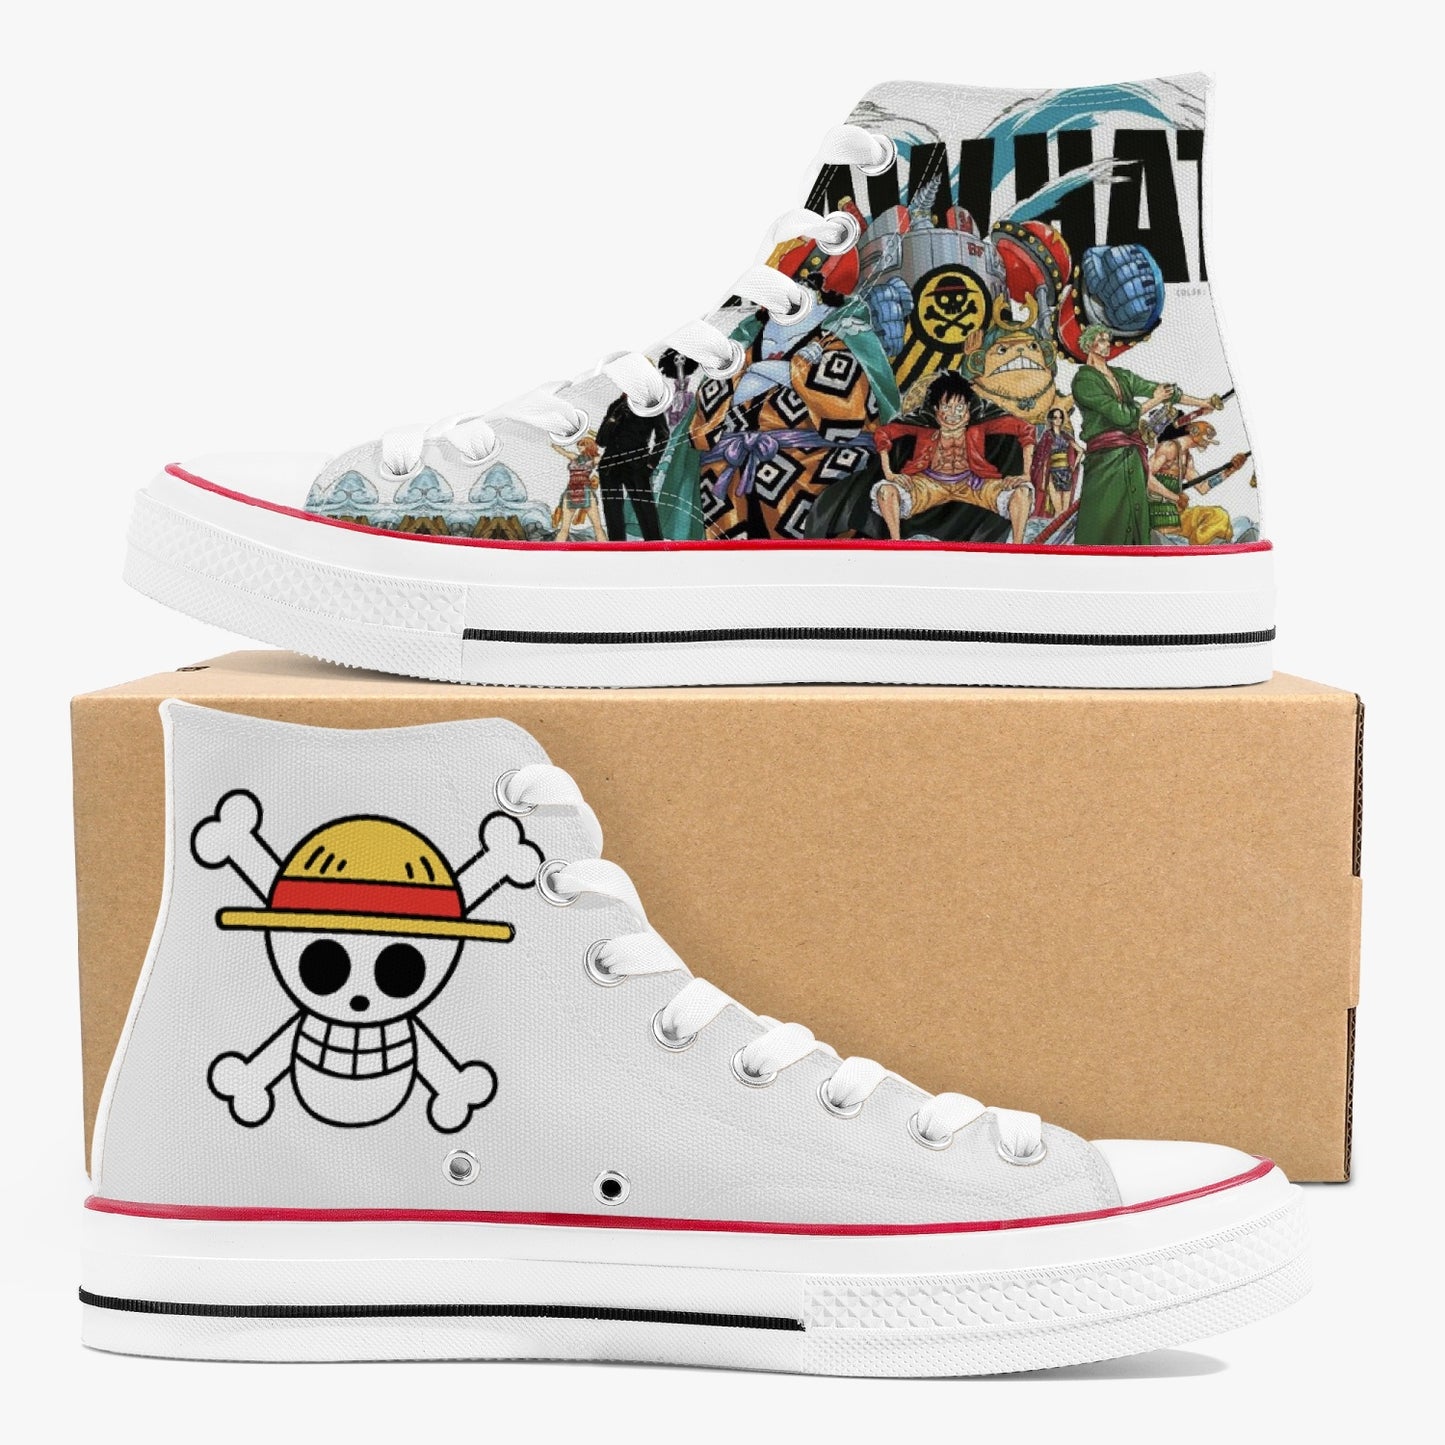 STRAWHATS CREW High-Top Canvas Shoes - White